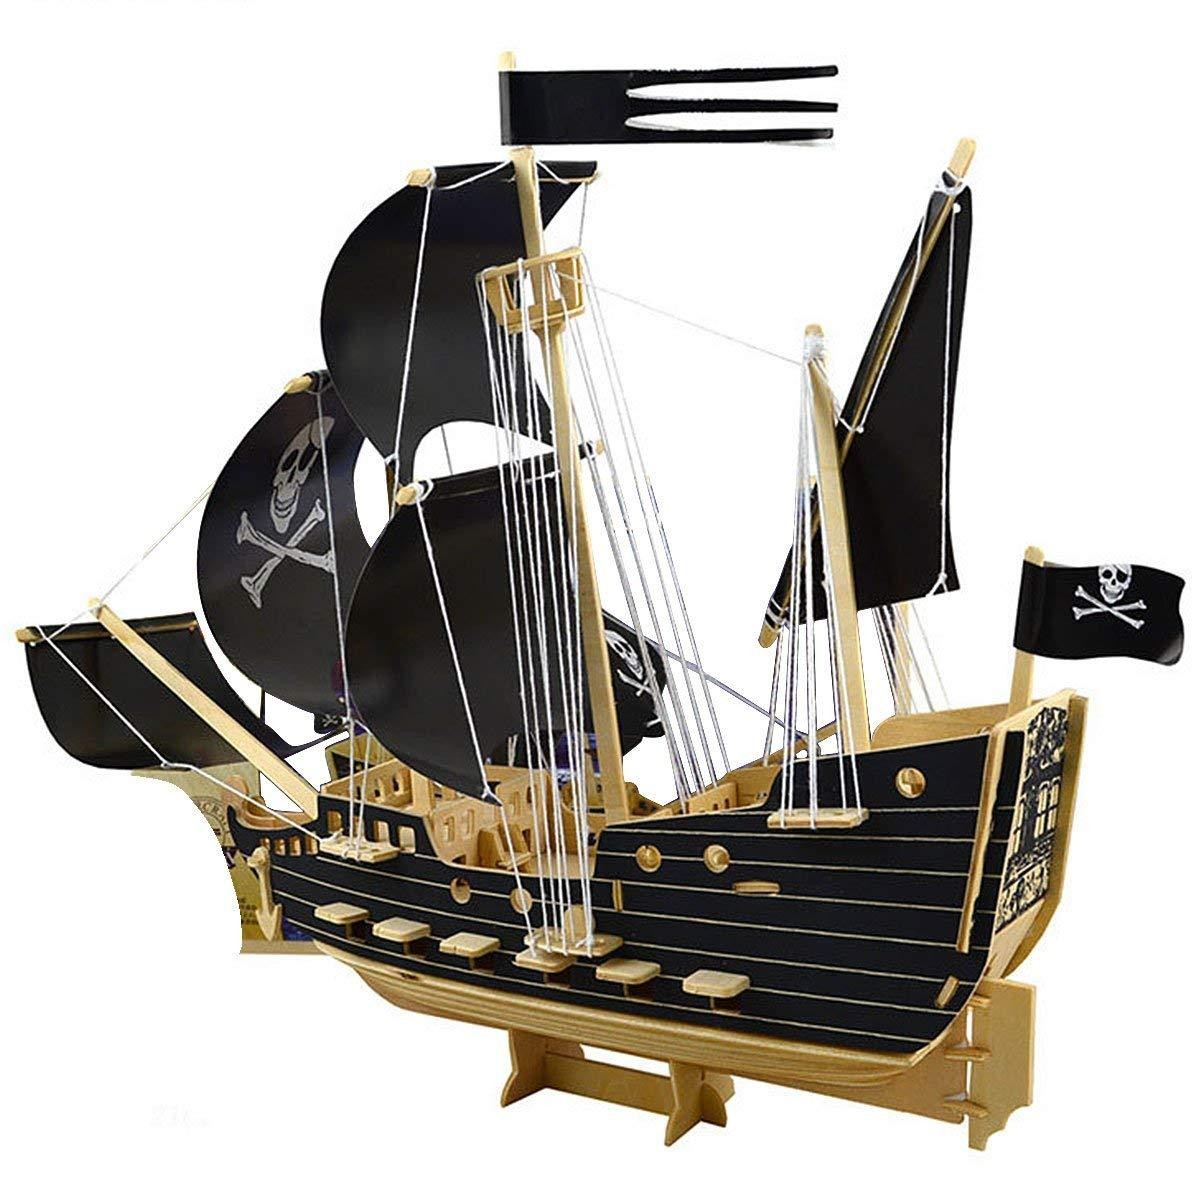 Papercraft Pirate Ship Pirate Ship Wooden Models 3d Wooden Sailing Ships Models Puzzle